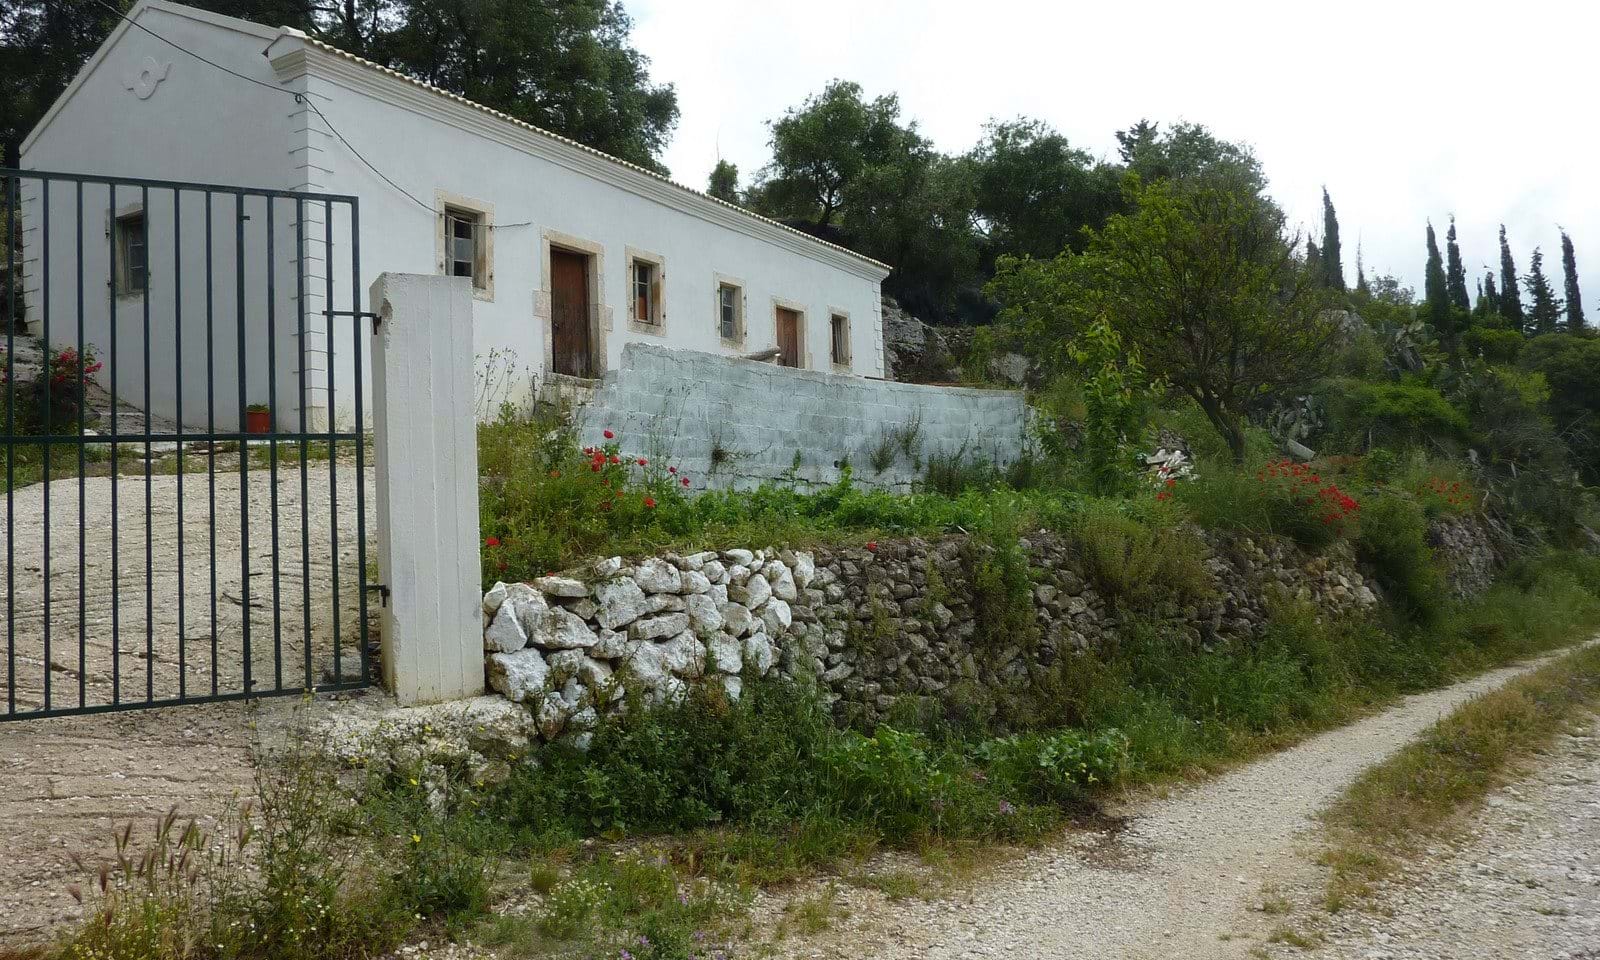 A very attractive building in a traditional style, with lots of potential. This house has had all the major structural work completed including a new roof and plastering. The inside has not yet been completed, but there is plenty of room for two bedrooms and a large living area and kitchen. The house is set in a large olive grove just above a quiet track and there is another plot of land below the track which also belongs to the property. Behind the house are some more old buildings (about 65 m2) which have not yet been renovated - these could be used as additional accommodation, or as storage.